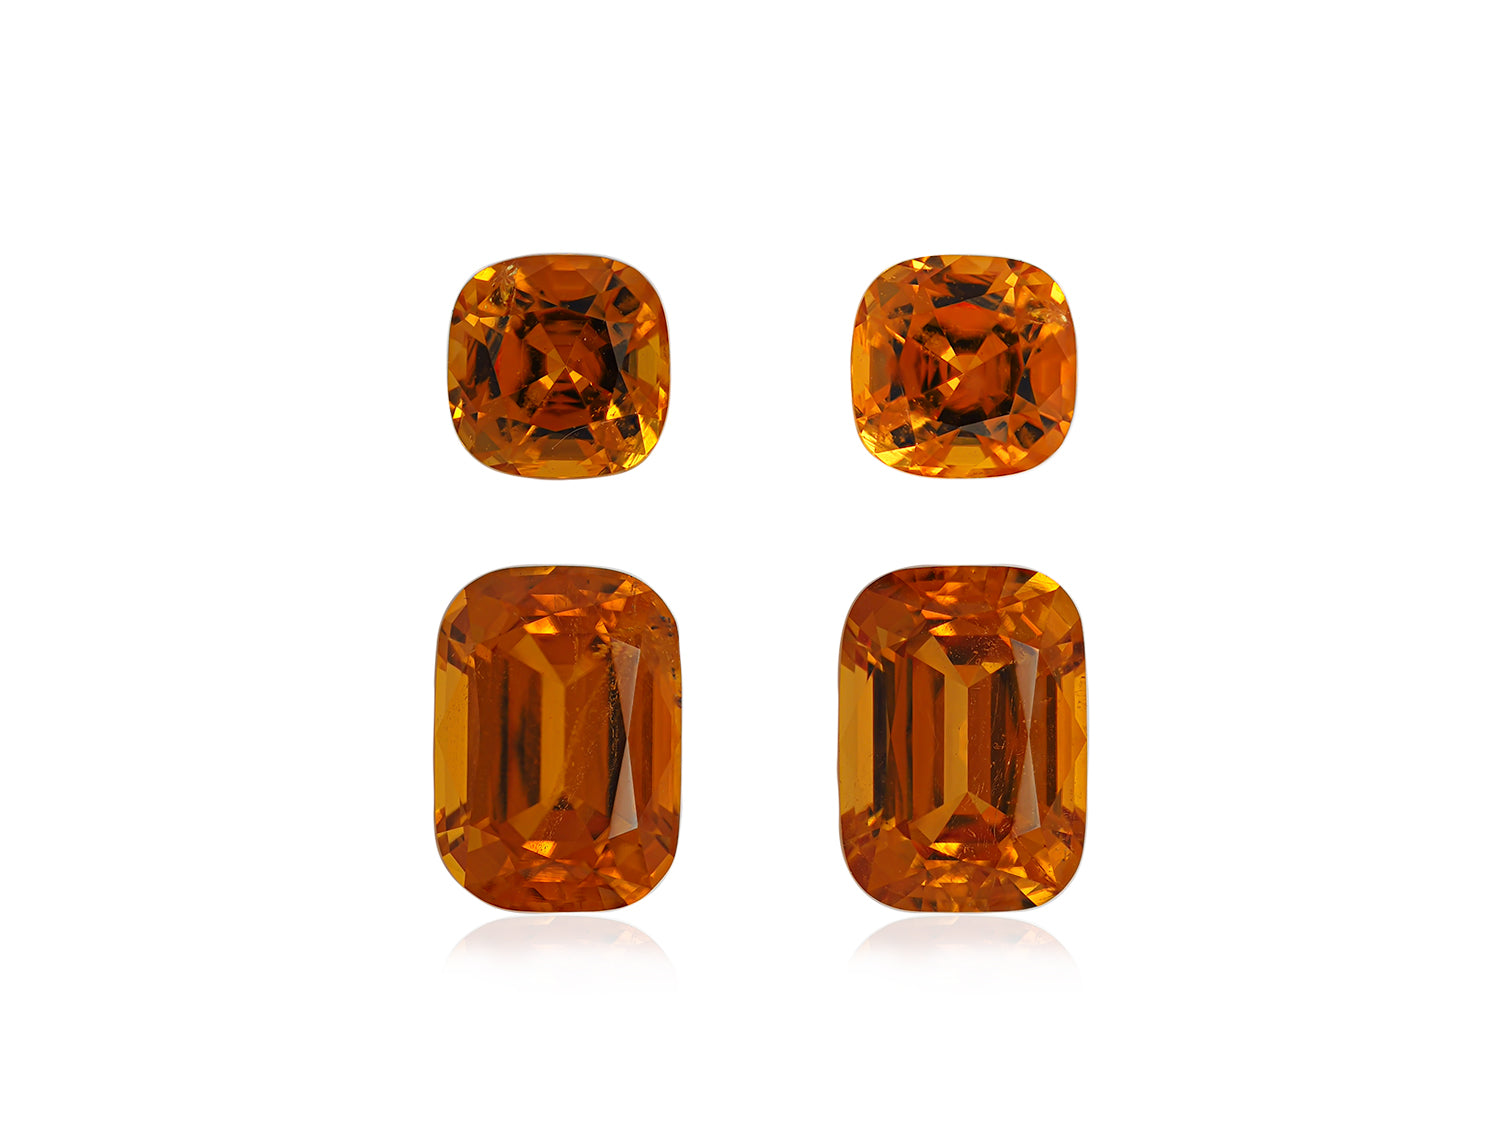 Earring Set Clinohumite 7.61 CT / 4